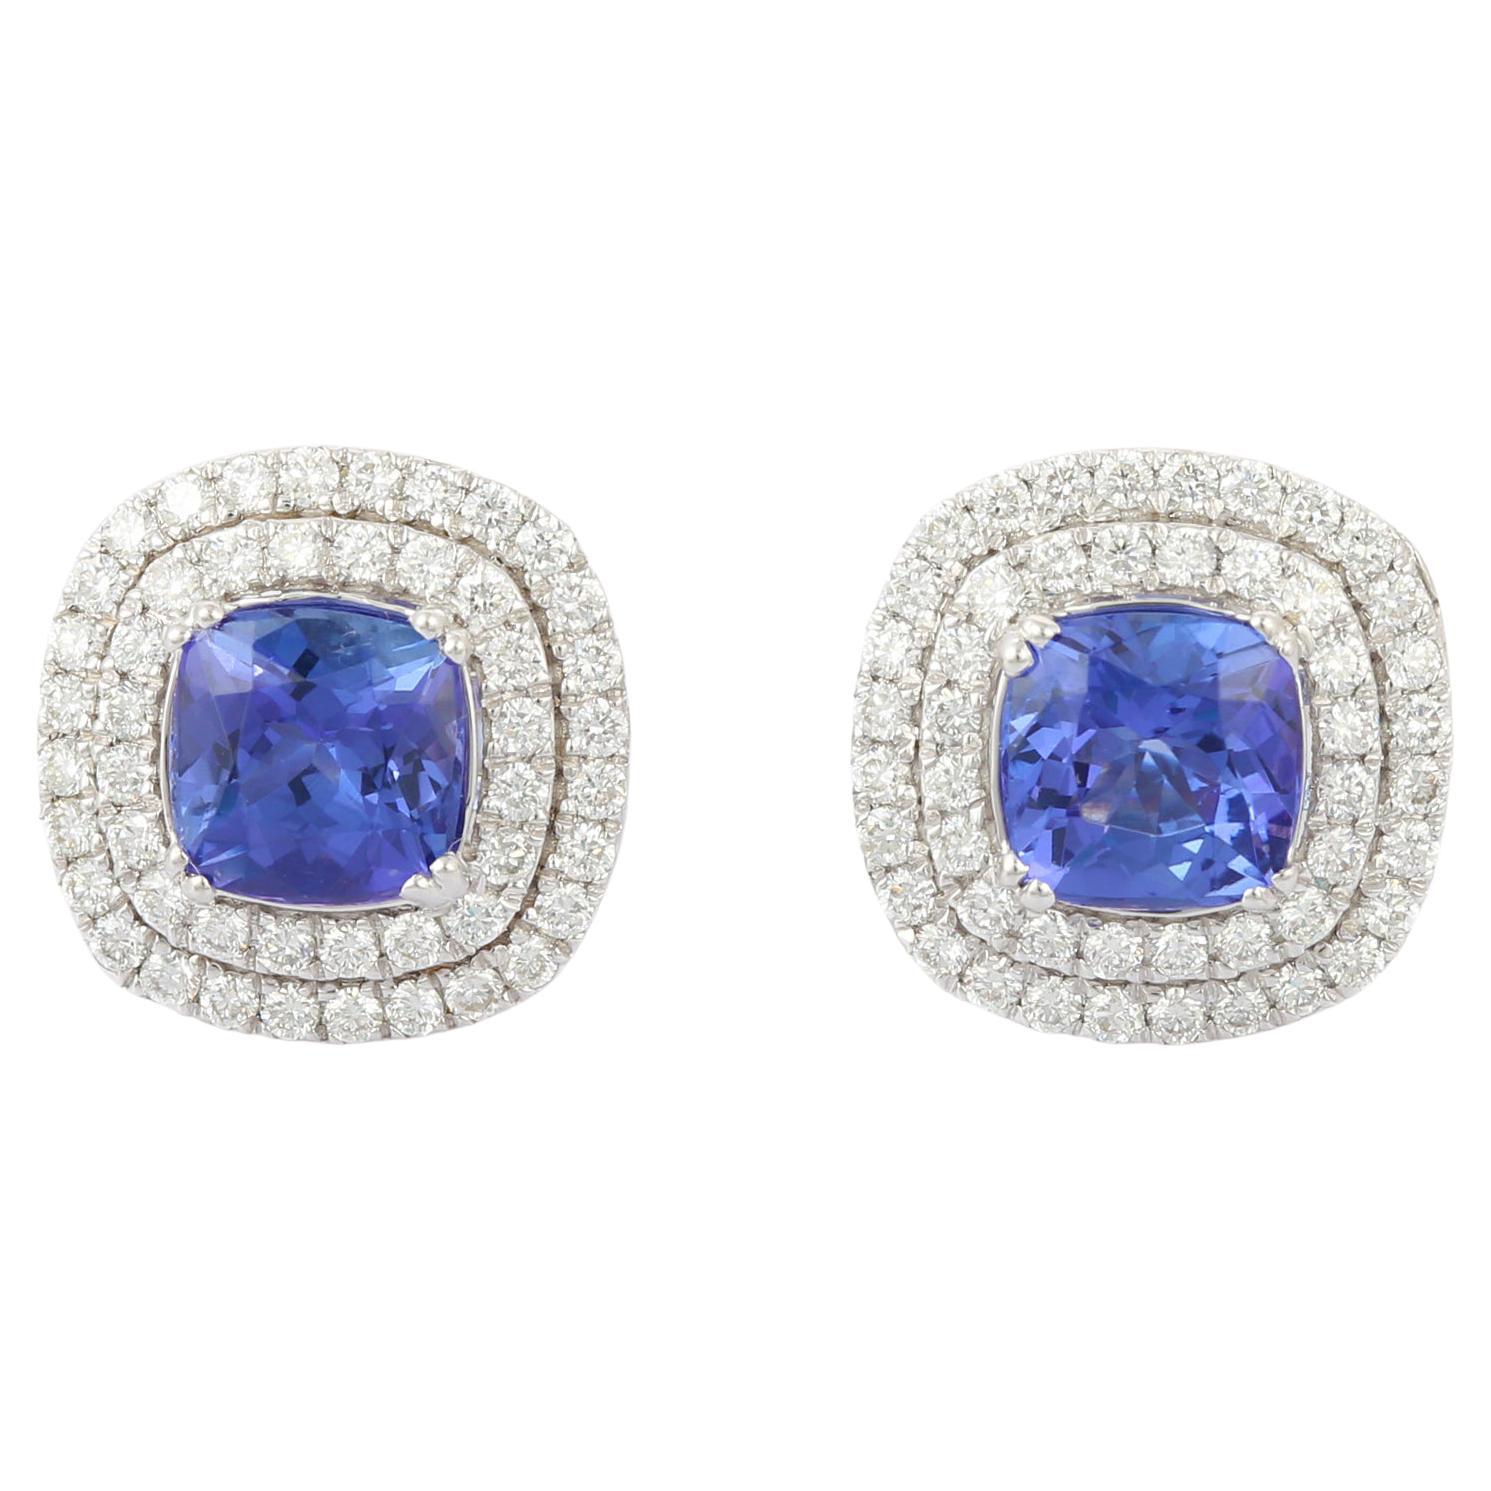 1.80 Carats Natural Tanzanite and Diamond Stud Earrings in 18K White Gold For Sale